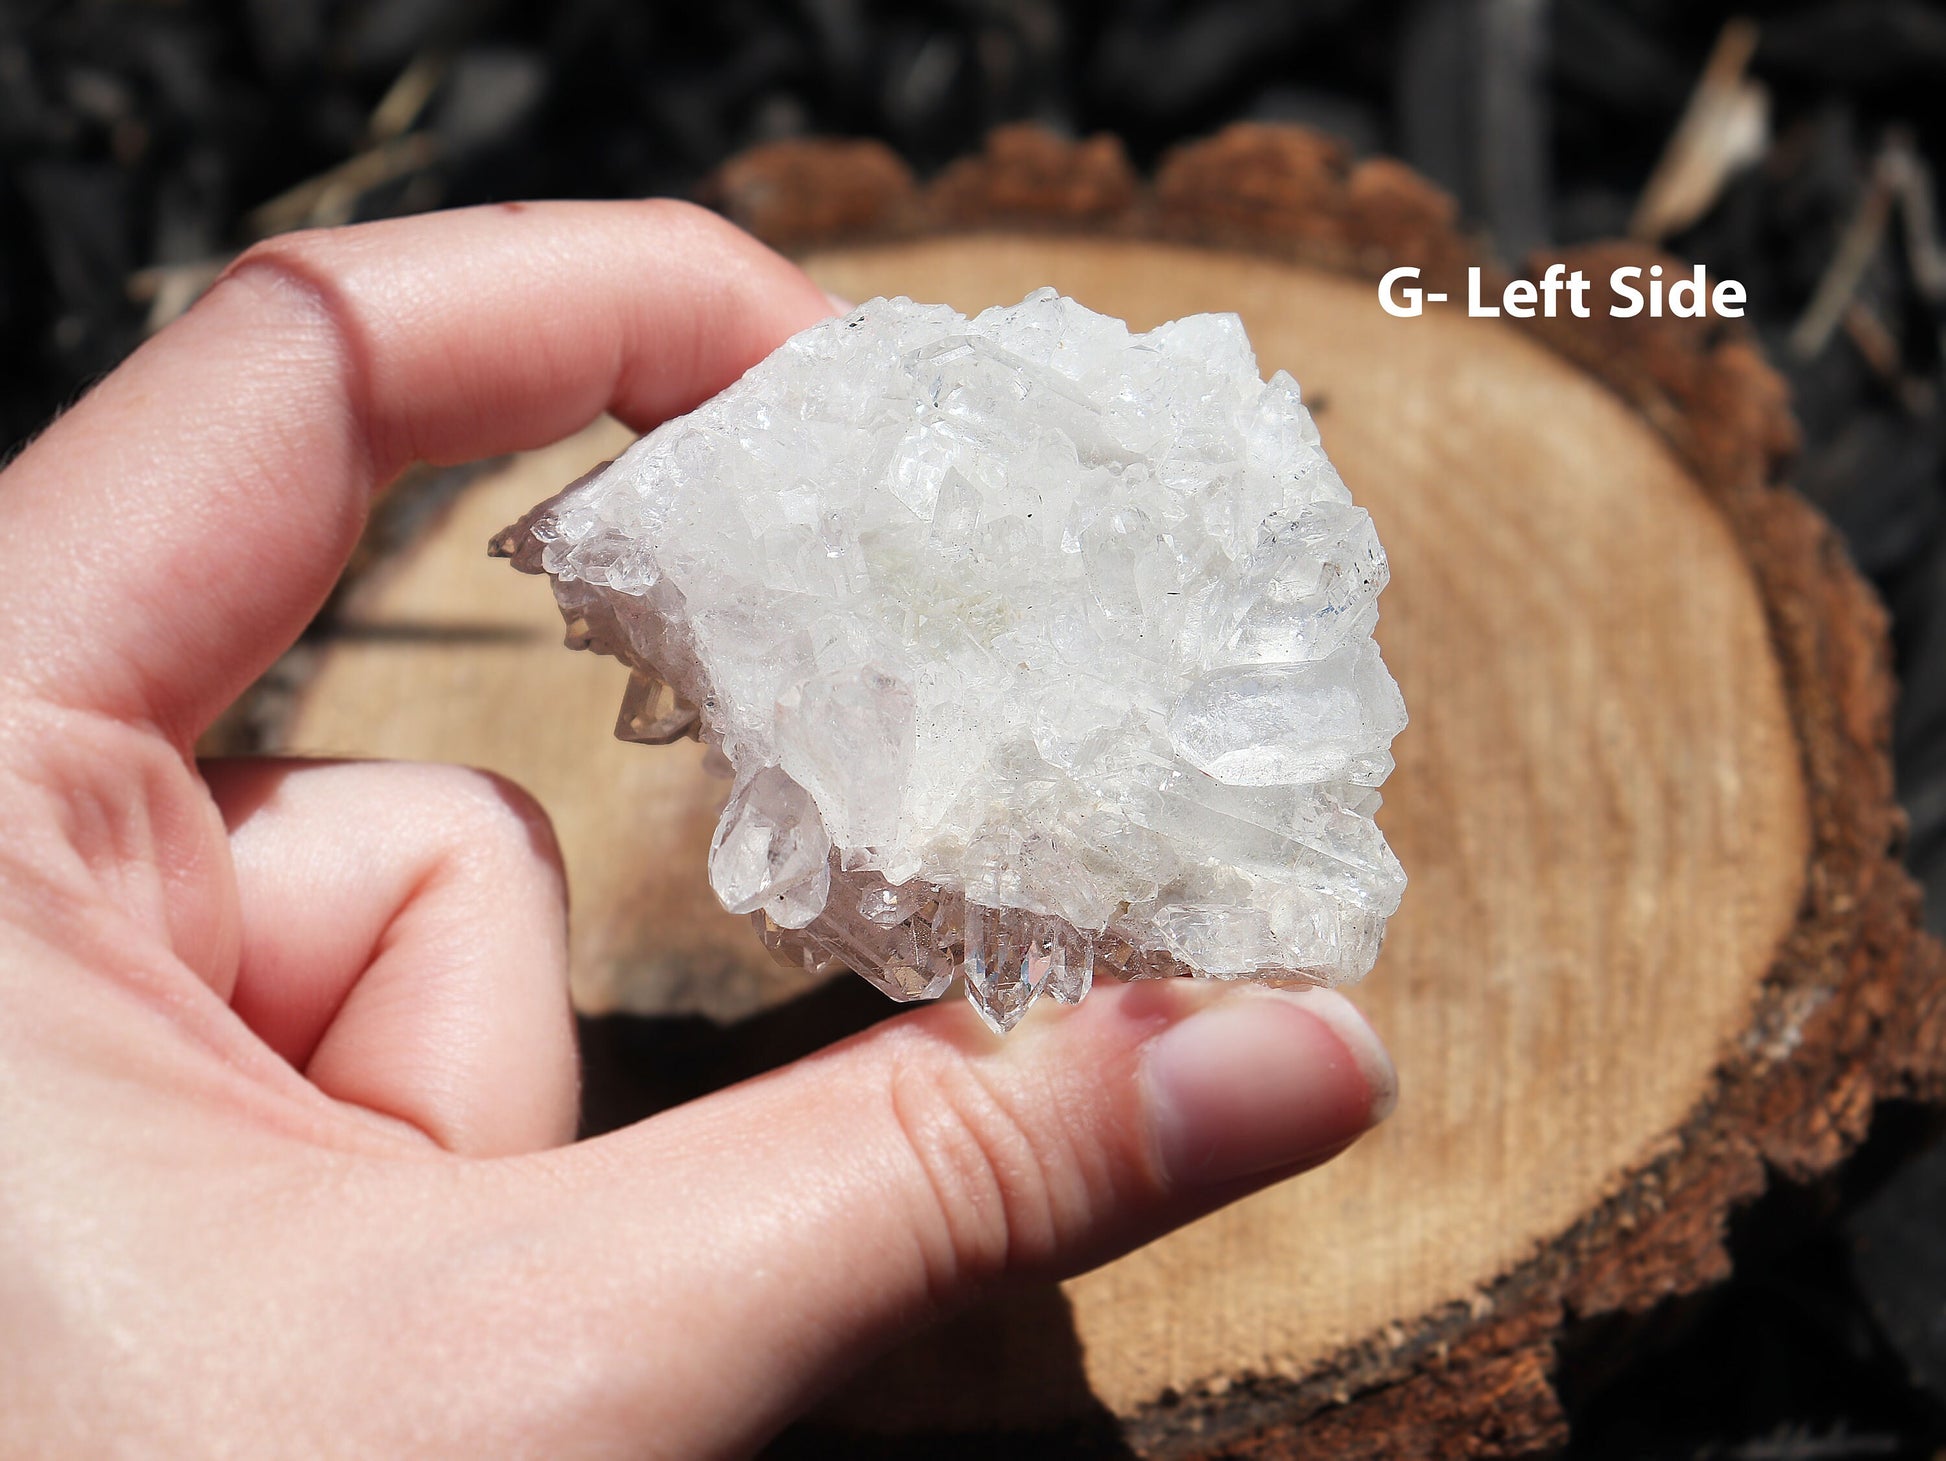 Clear Quartz Cluster Specimen, Natural Crystal Formation, Ethically Sourced, 7-2 inches long